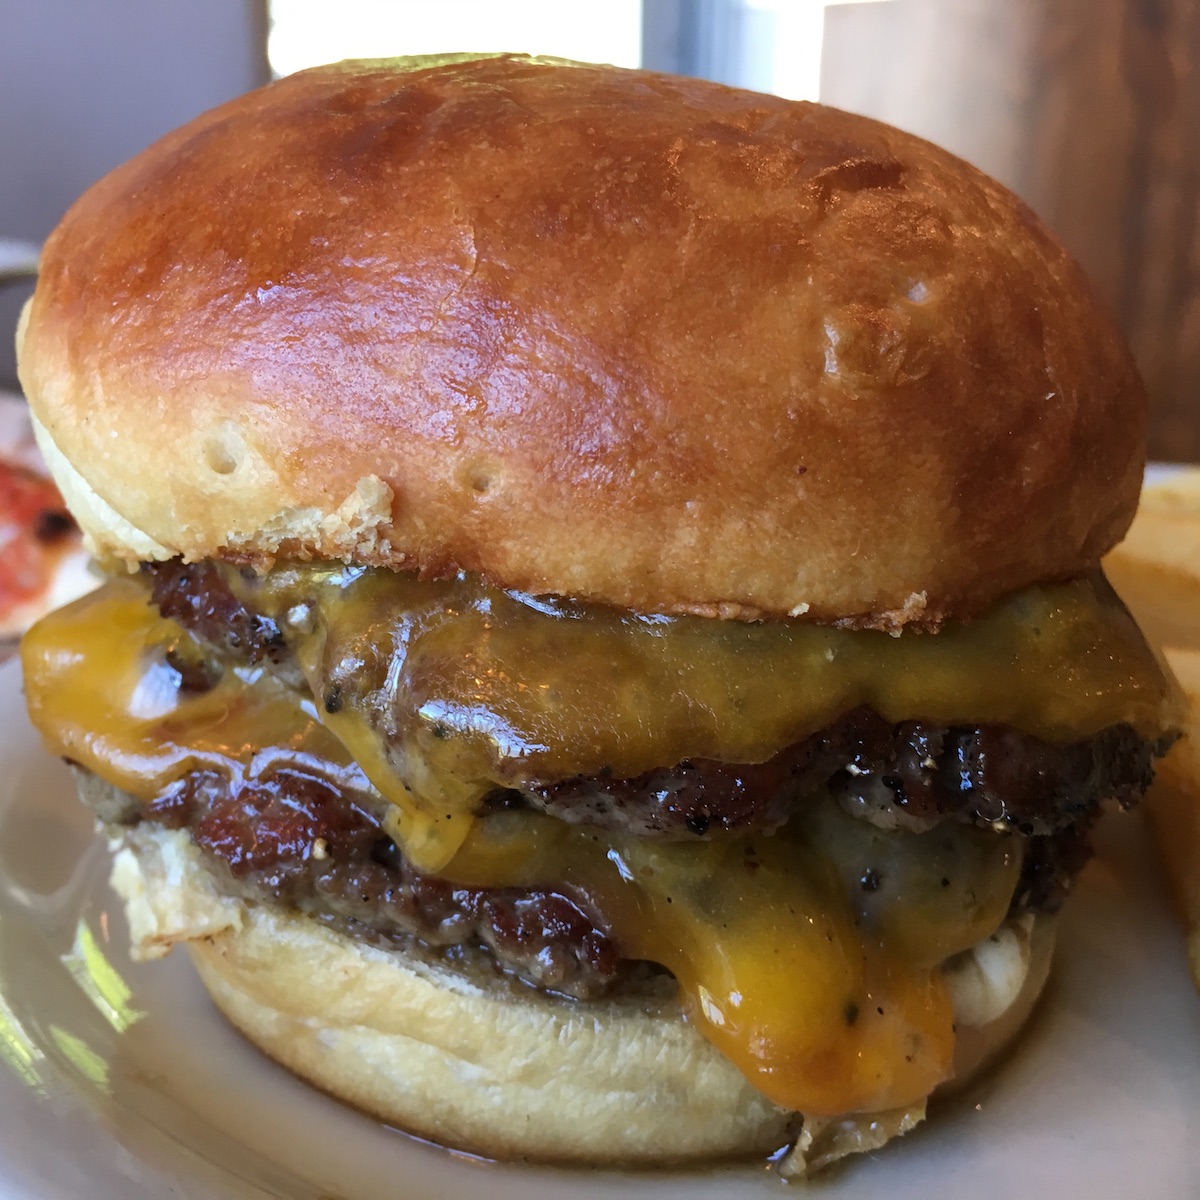 PROOF Cheeseburger from PROOF in Wynwood, Florida